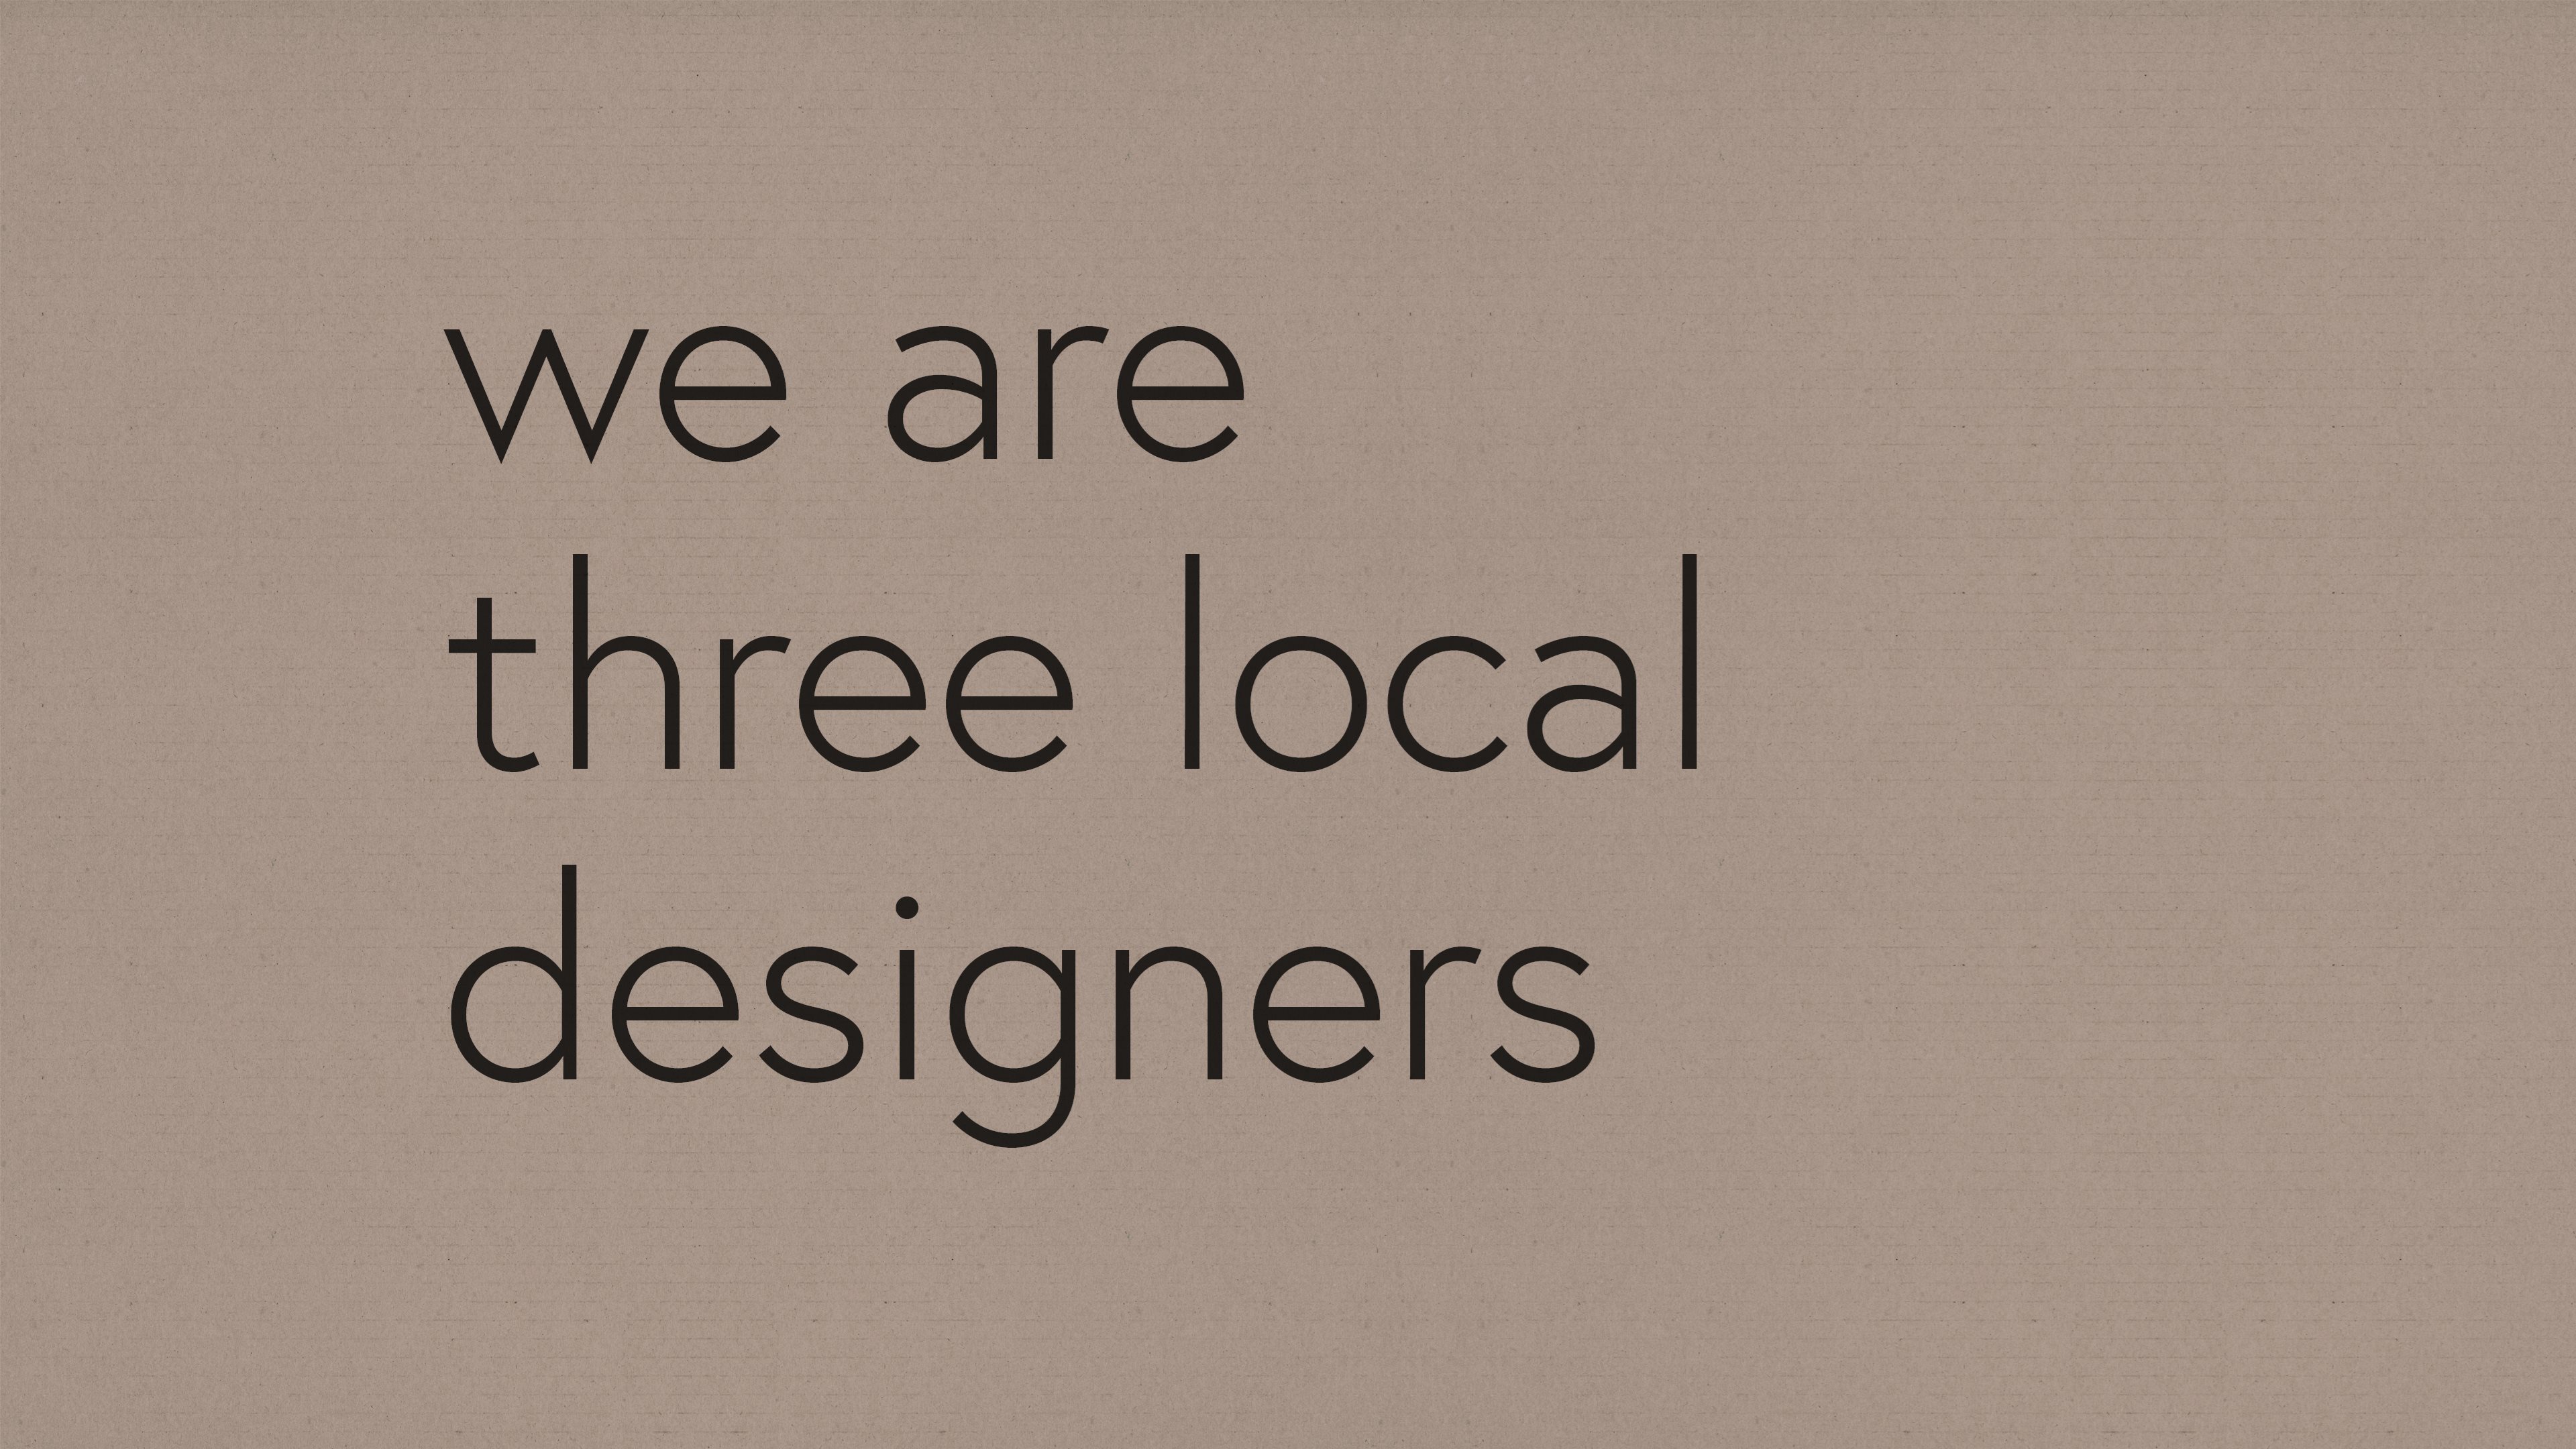 We are three local designers - Saunders Design Group